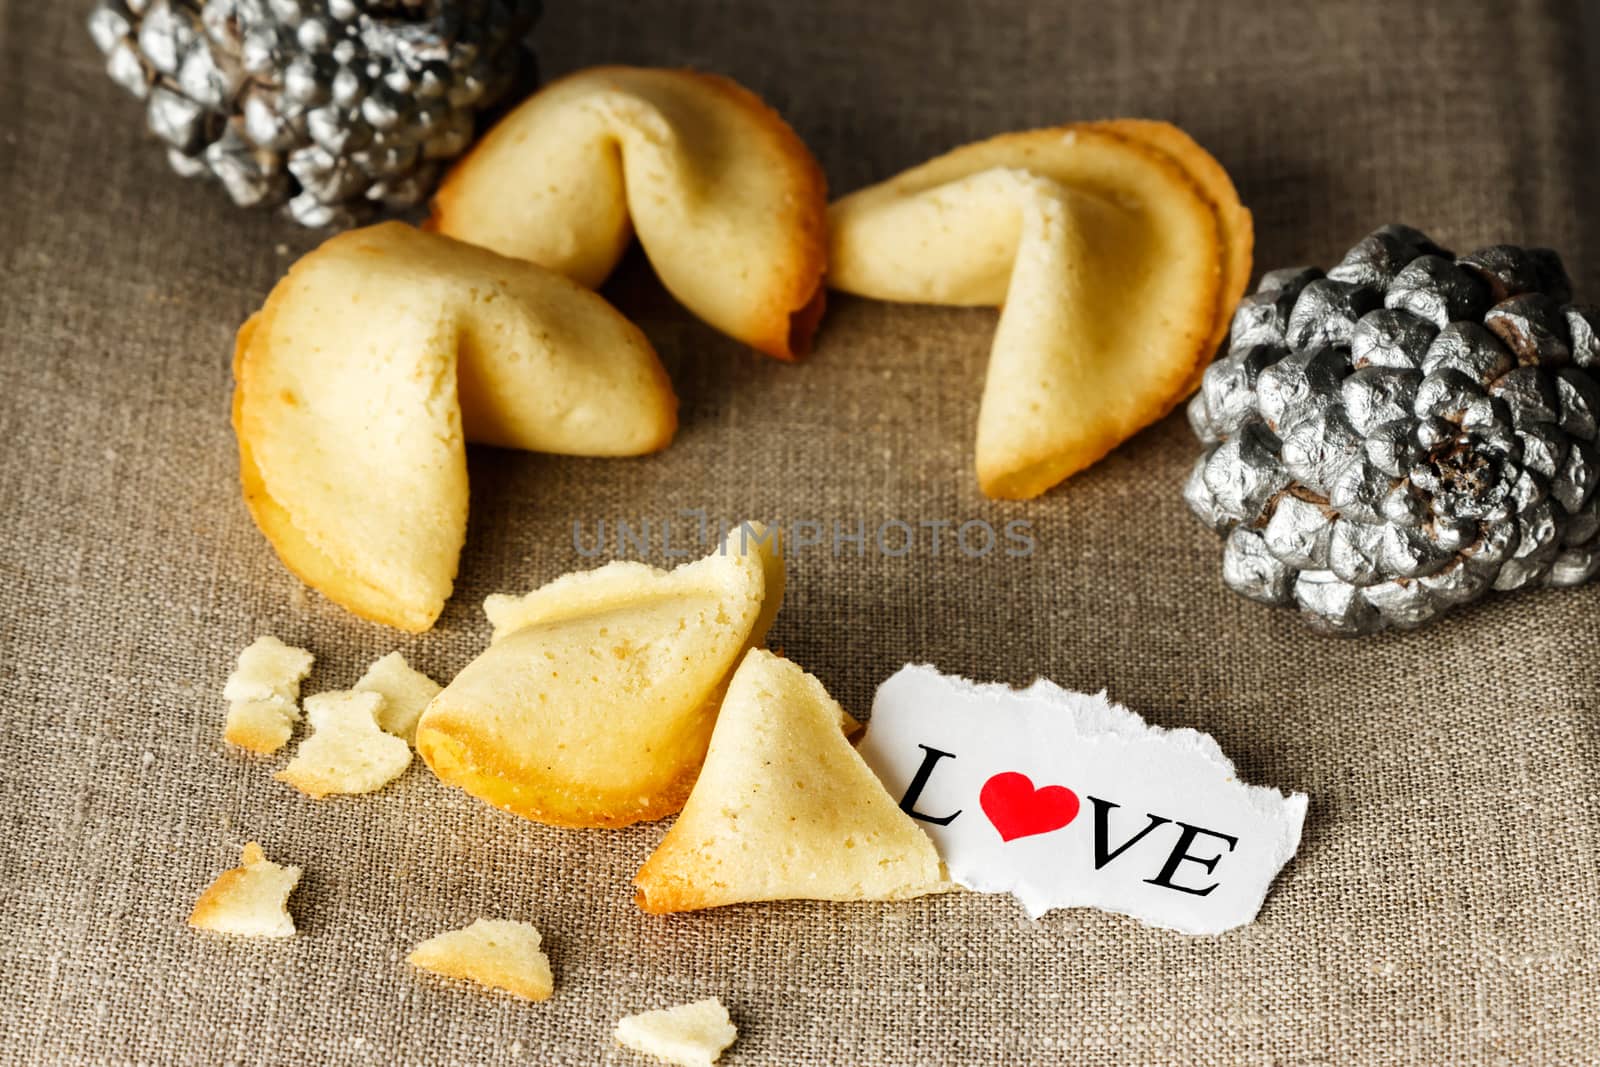 Cookies shaped like tortellini with the word love written on a paper and two silver pineapples in the background.Horizontal image.